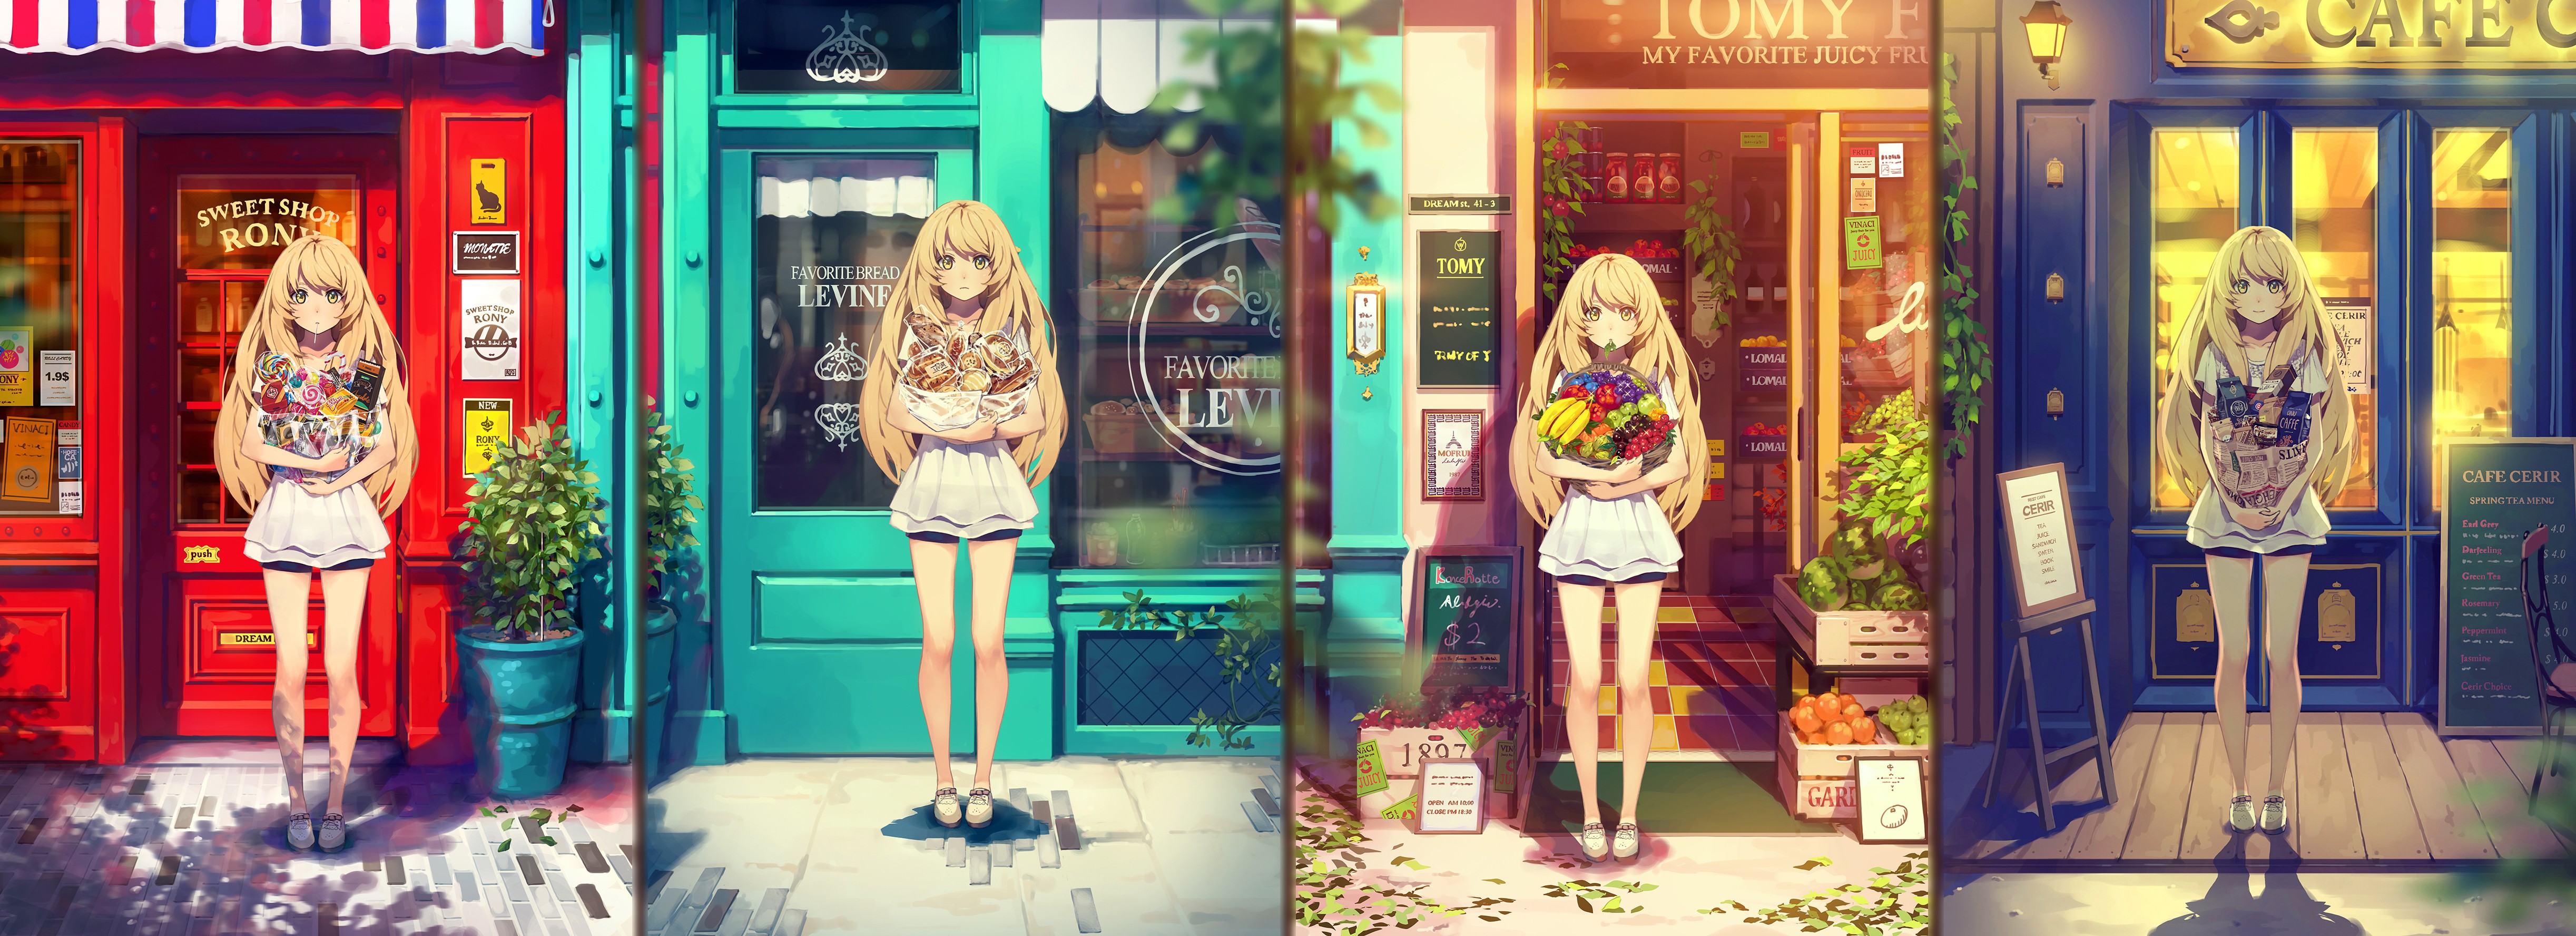 Anime 4890x1776 anime girls stores sweets blonde lollipop long hair yohan12 collage